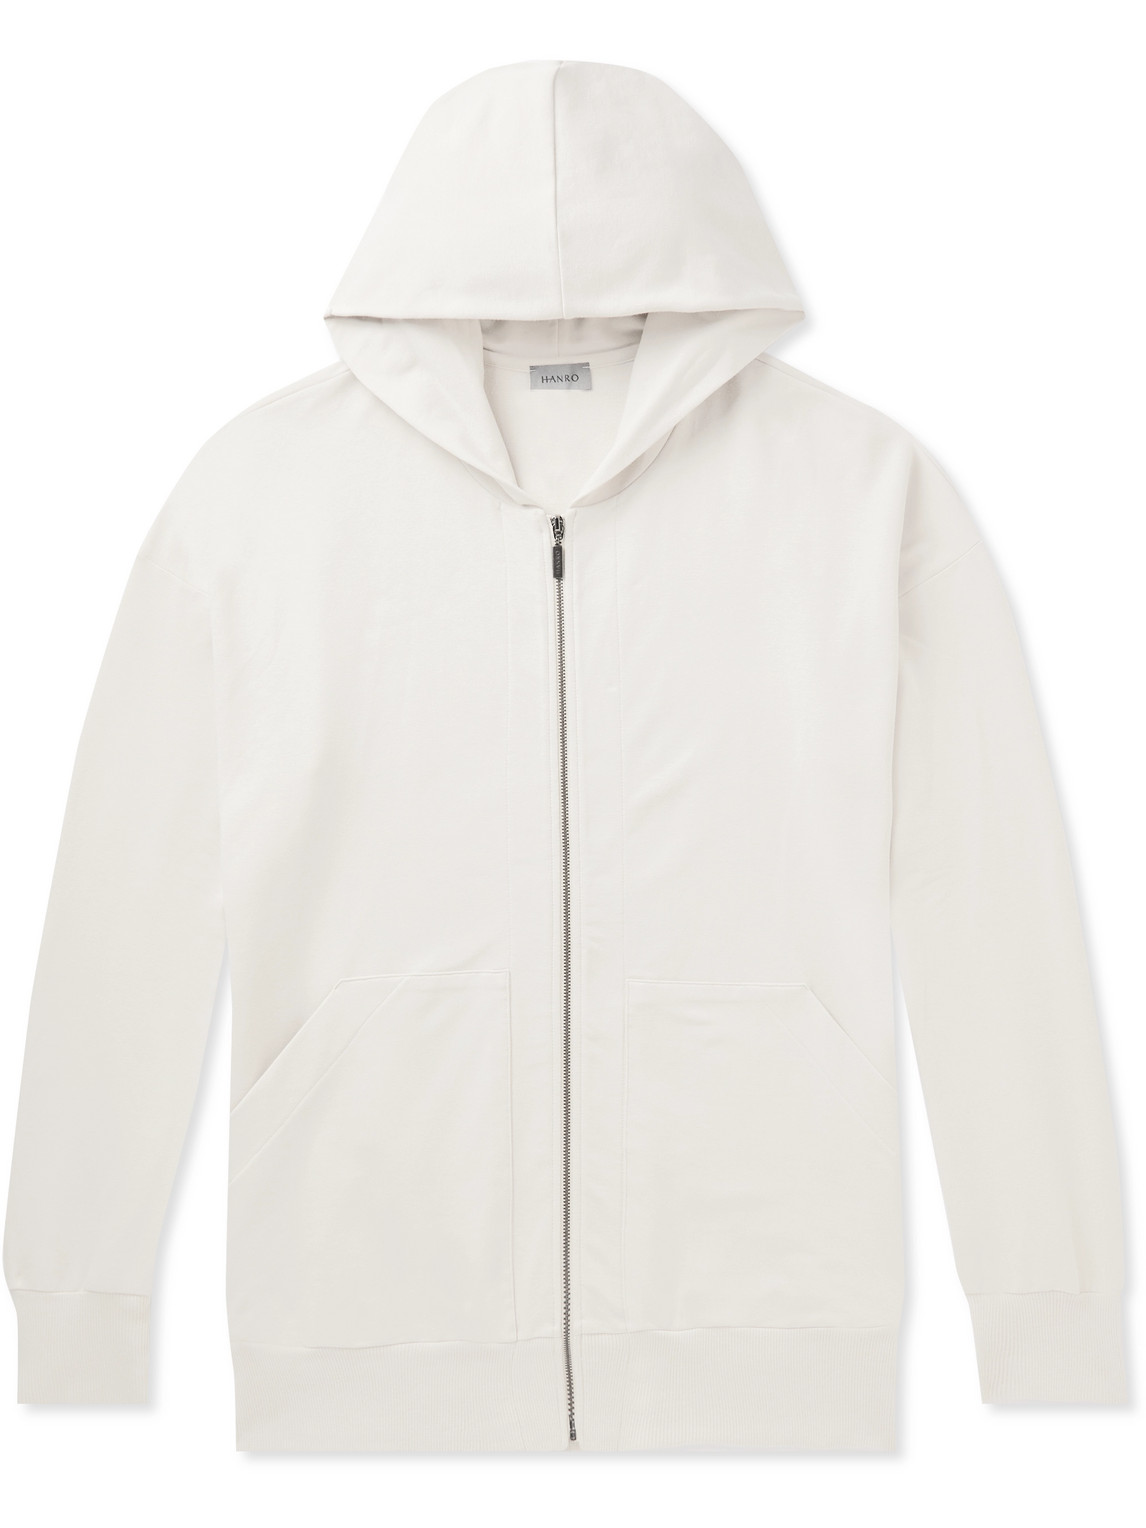 Natural Living Stretch Organic Cotton-Jersey Zip-Up Hoodie